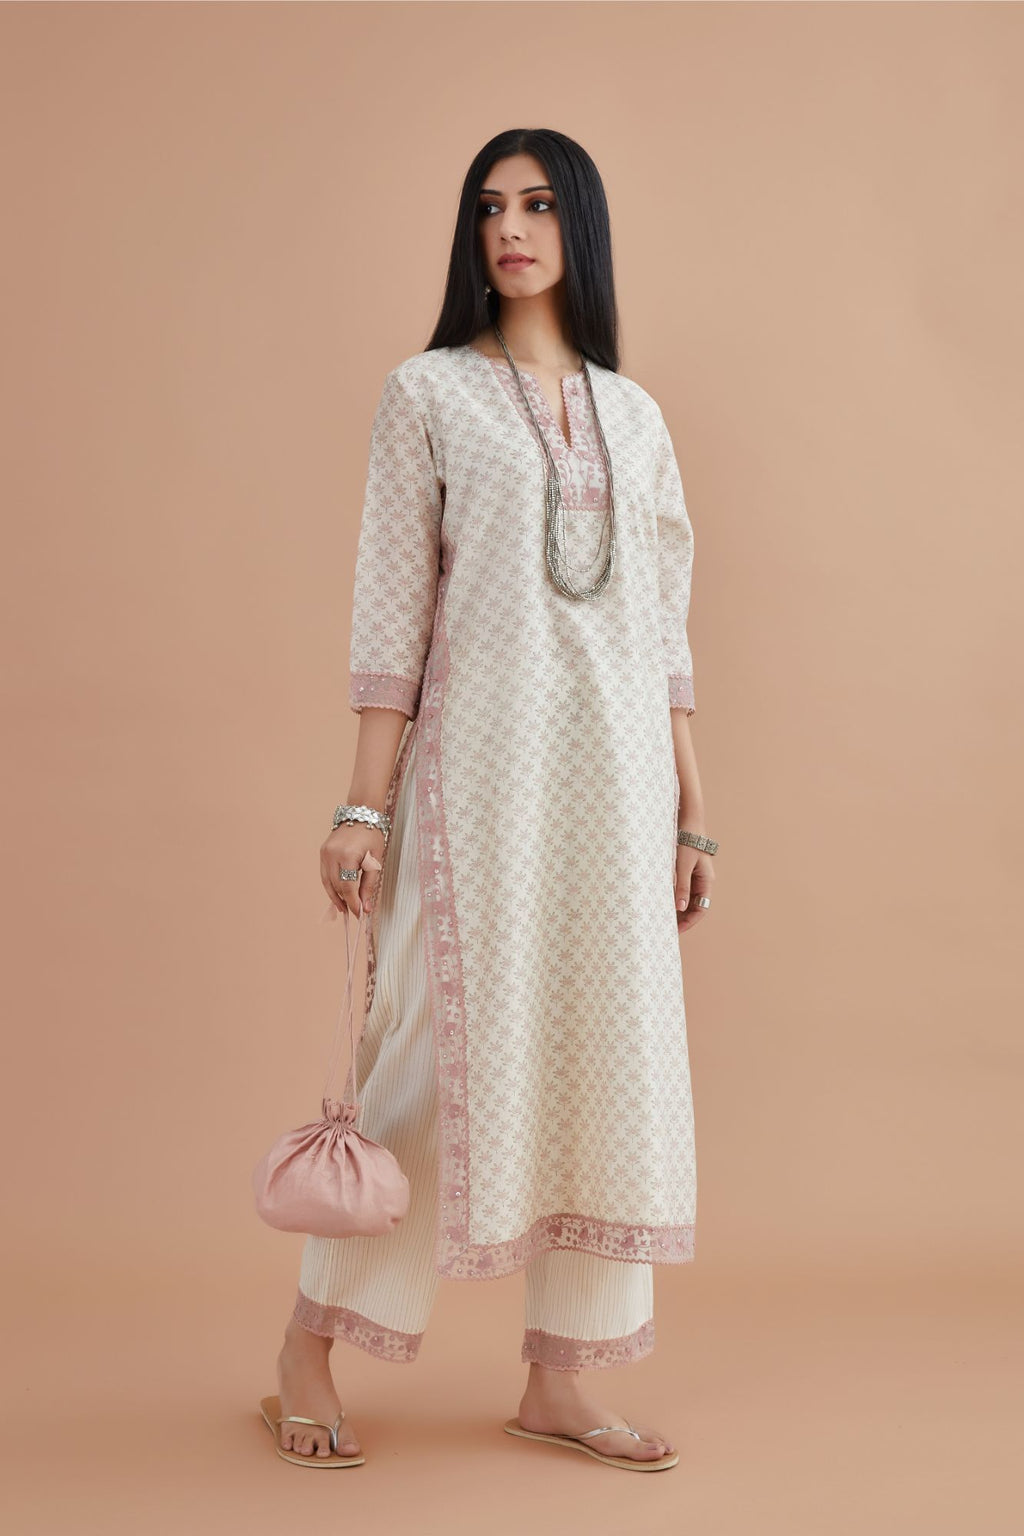 Silk Chanderi kurta set with all-over pink lotus hand block print and embroidery at neck, kurta sides and sleeves